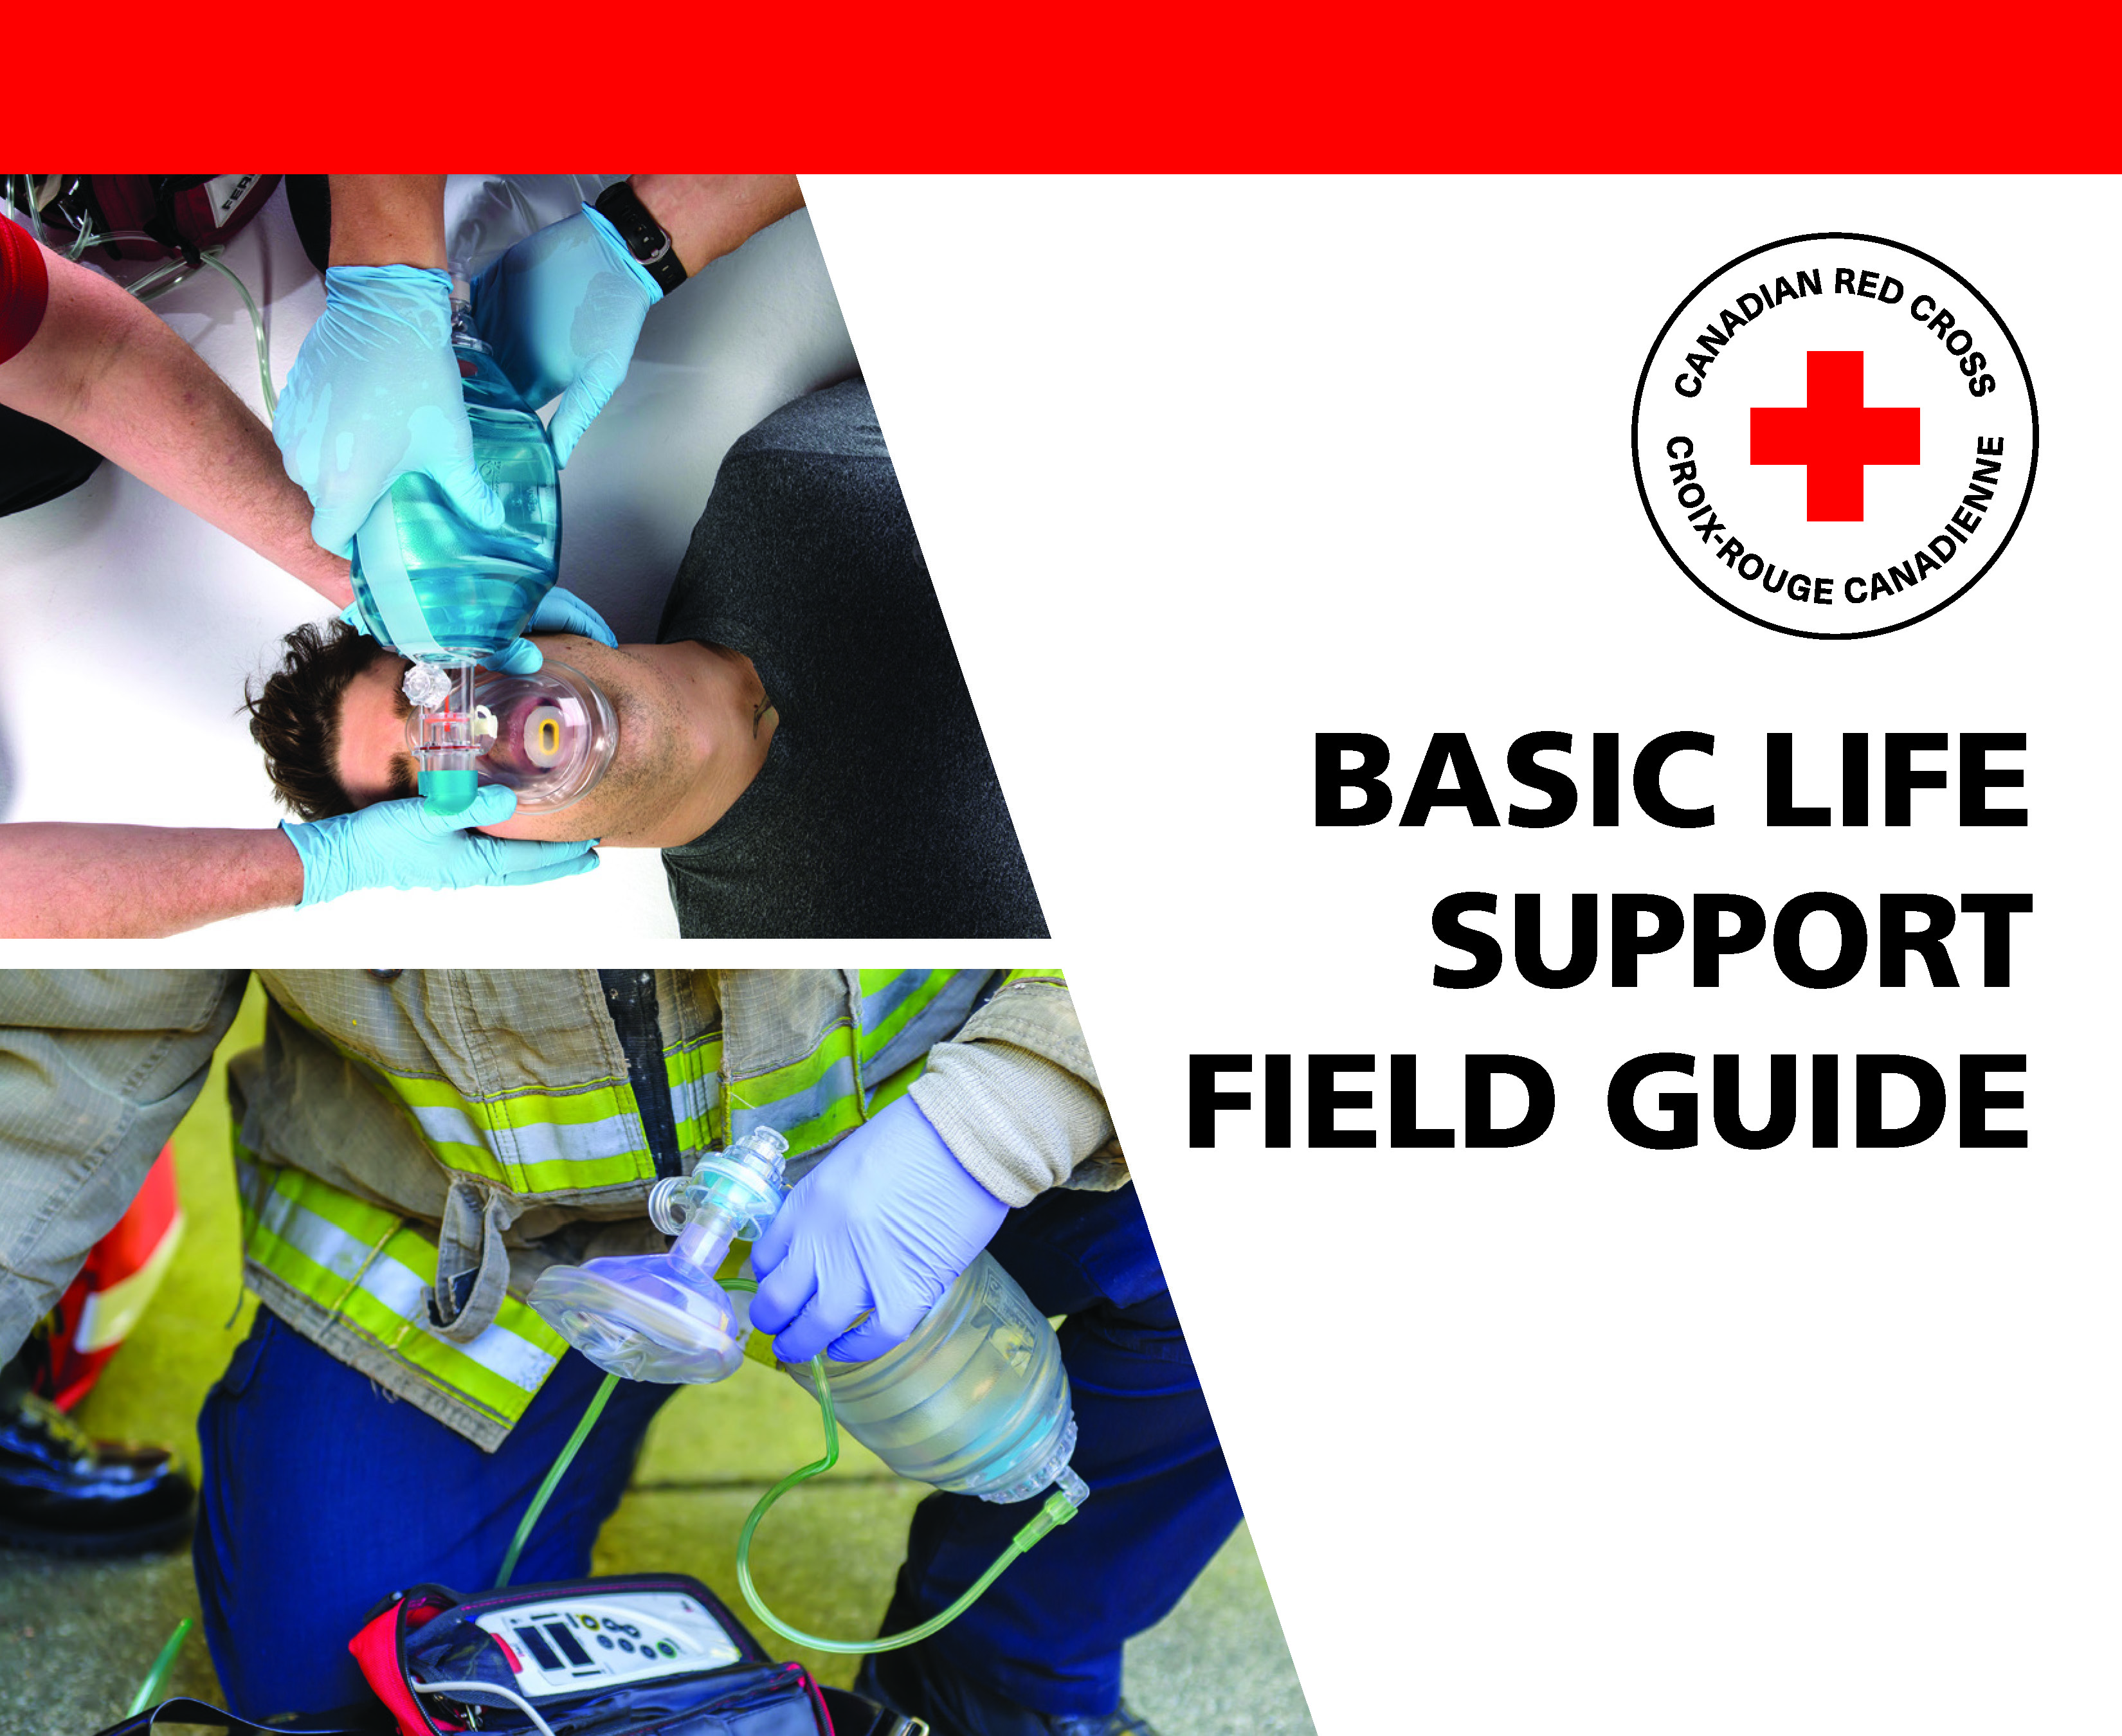 First Aid Course Materials for Airway Management in Vancouver